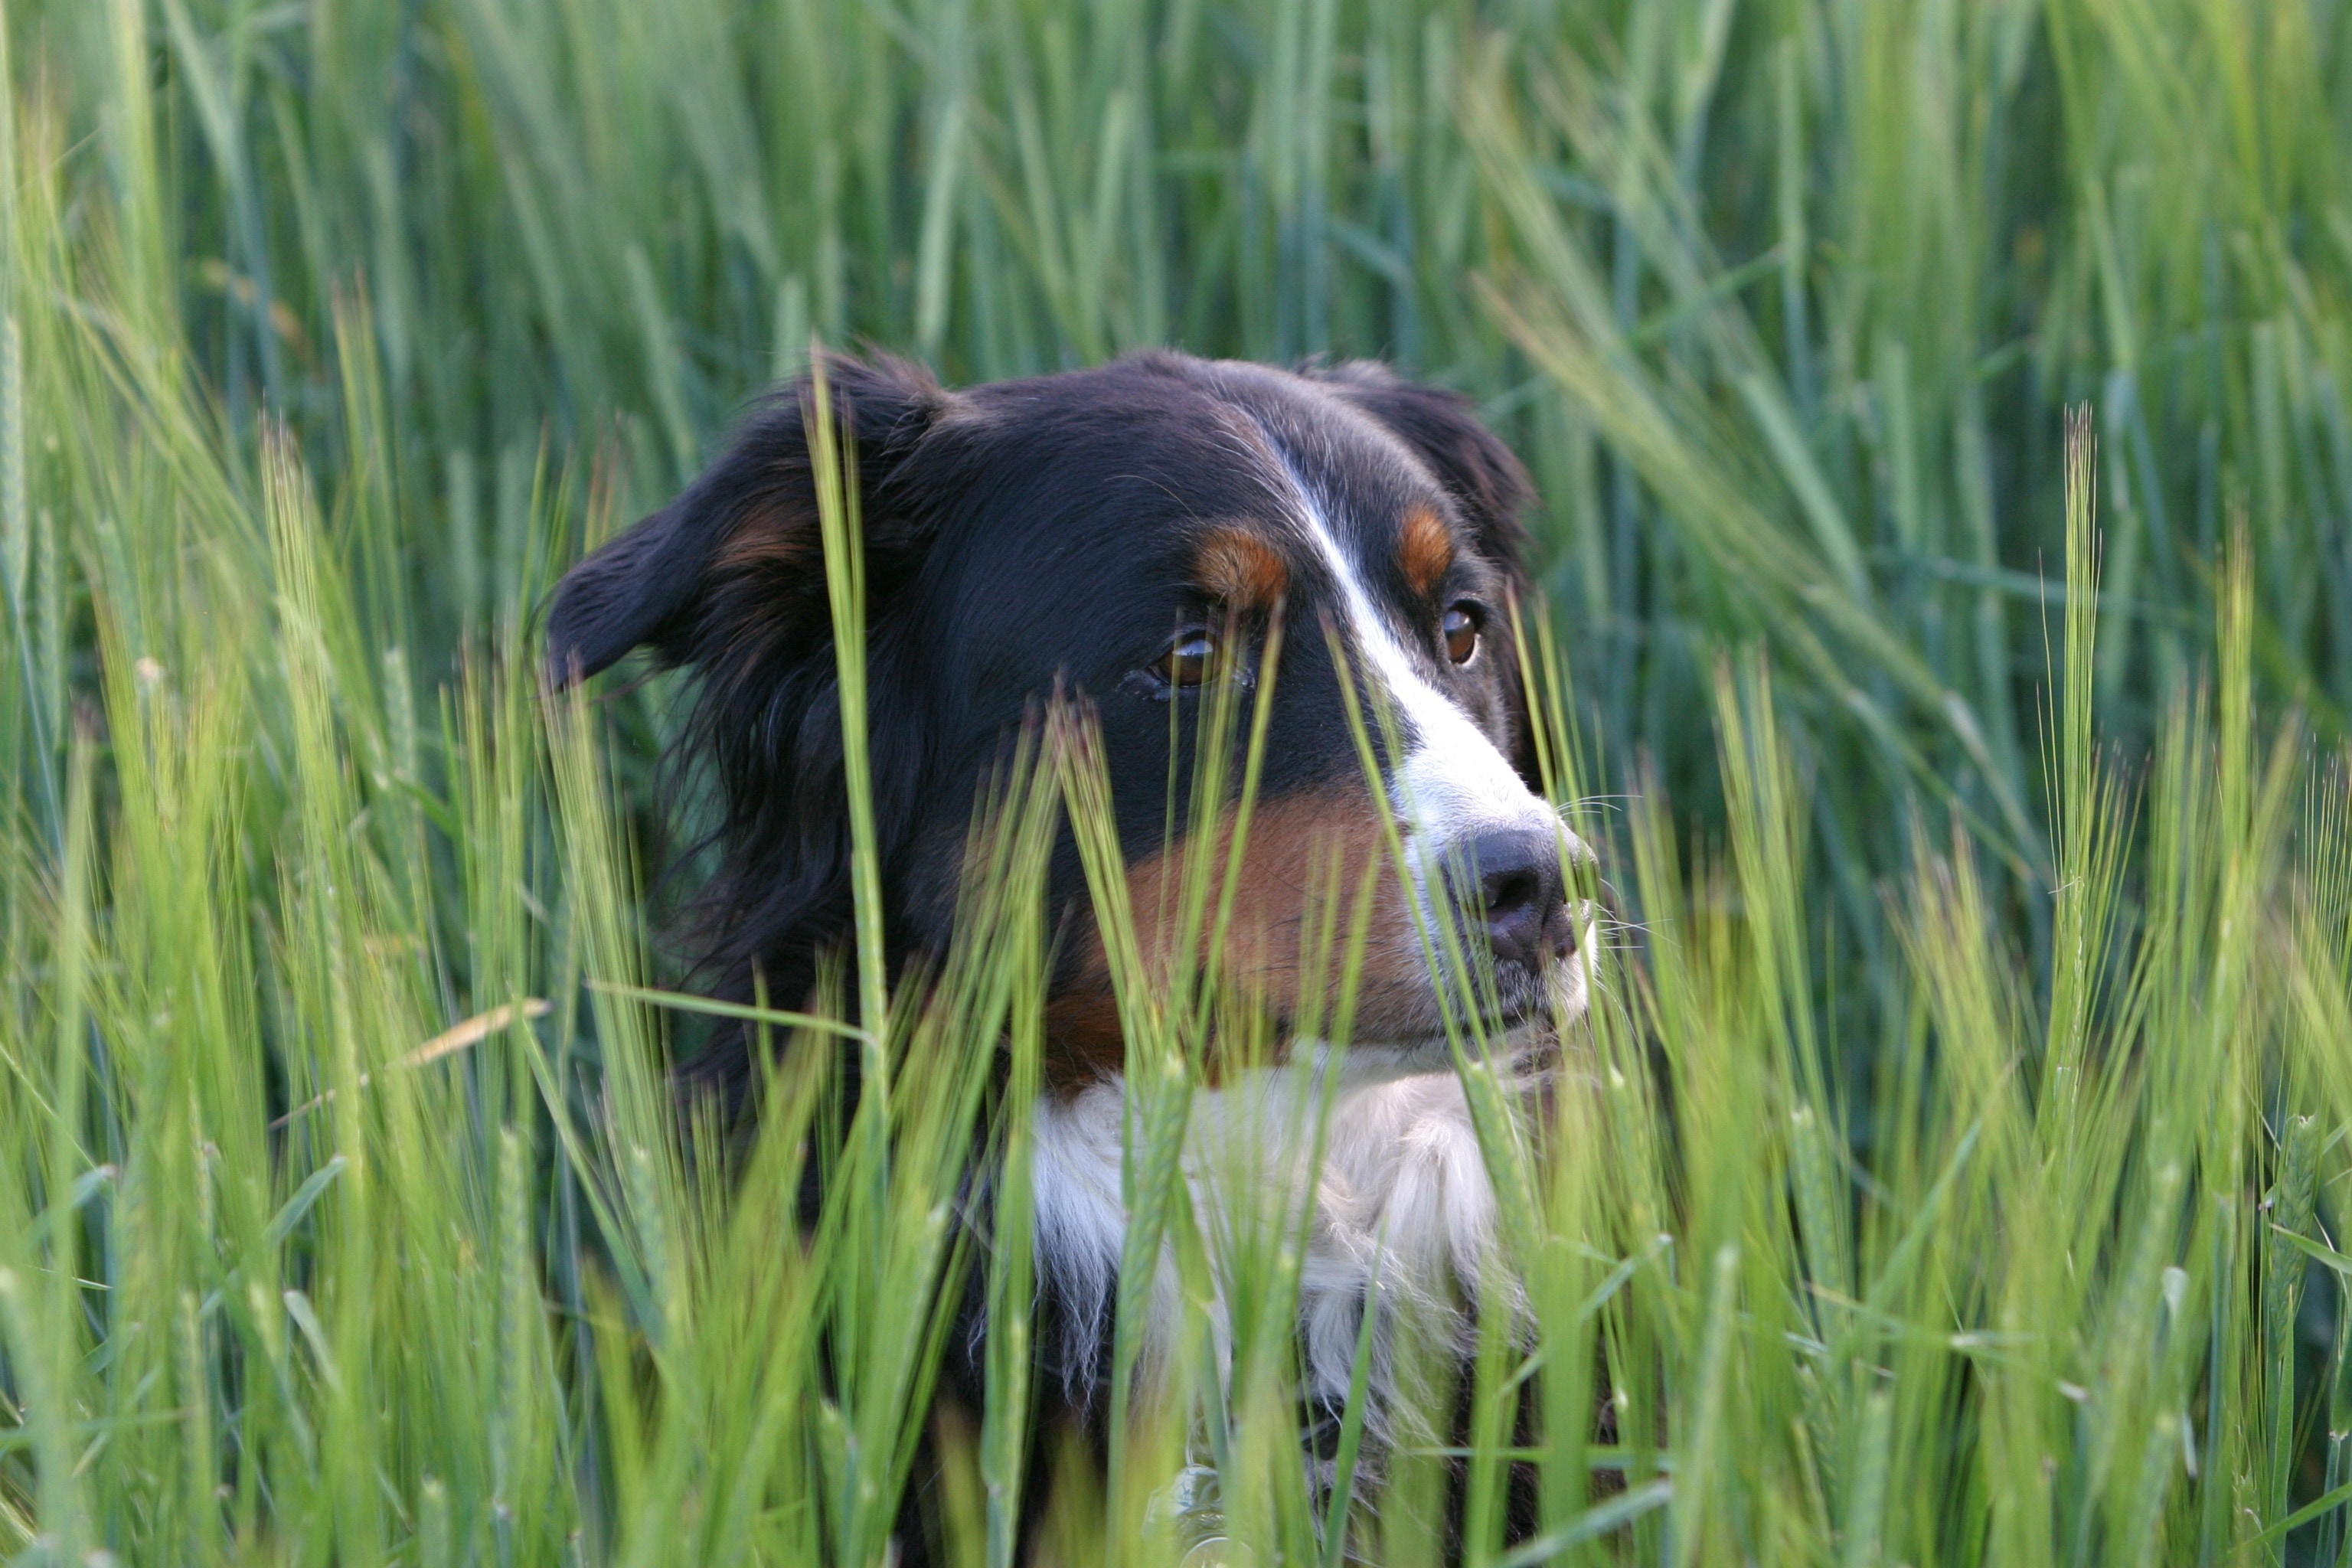 bernese mountain dog on grass field during daytime